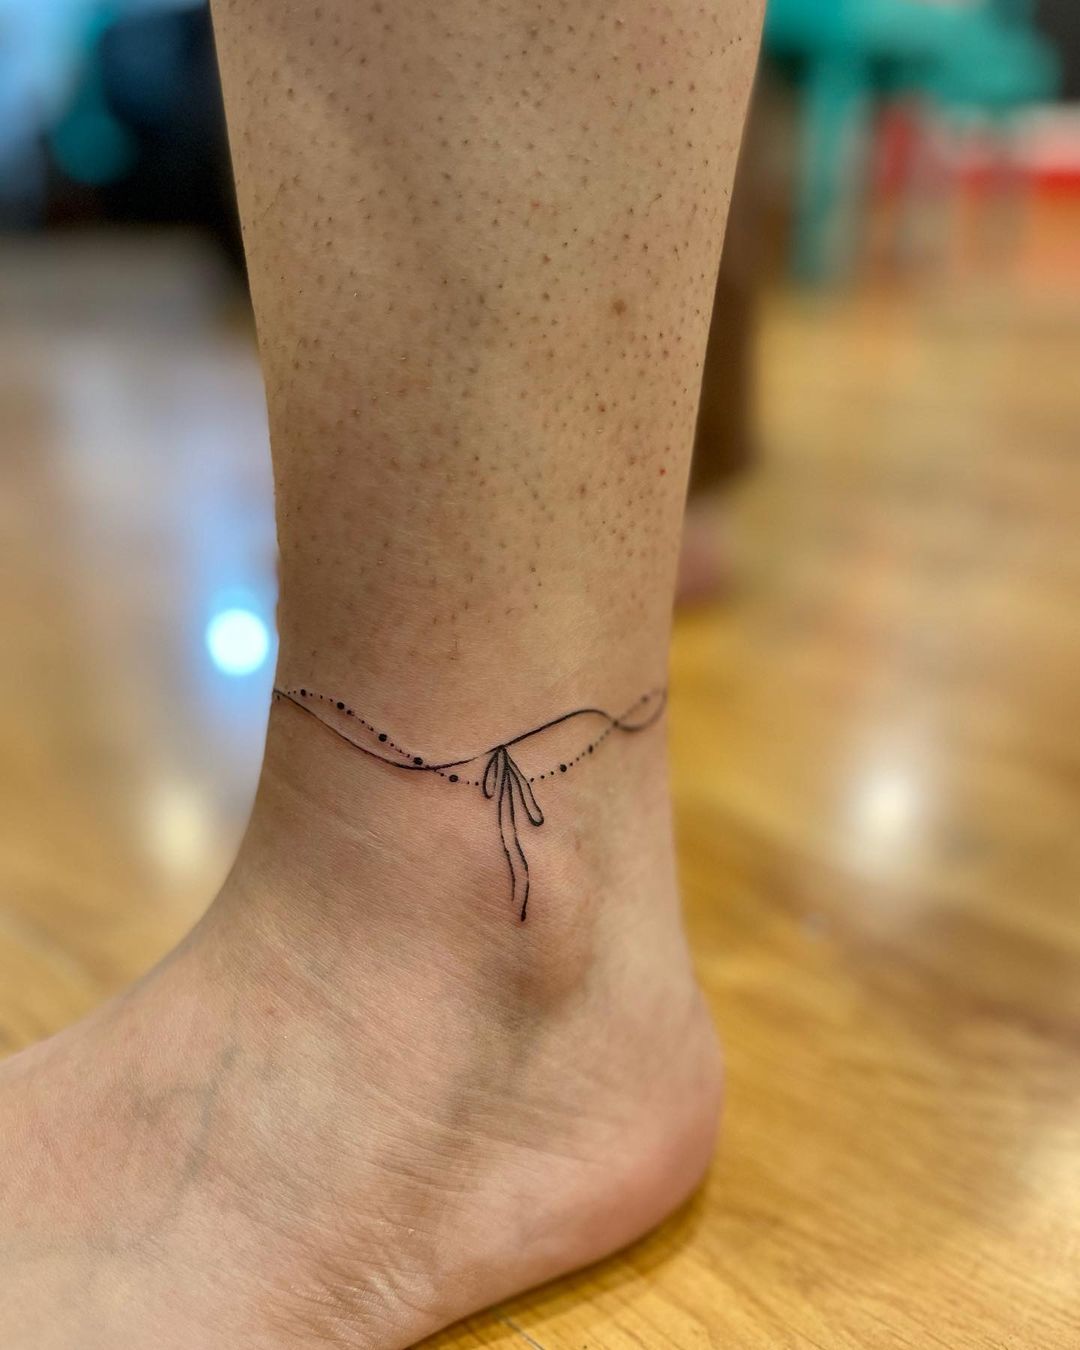 Small Tattoos For Girls - 25 Meaningful, Cool, Unique & Cute Small Tattoos